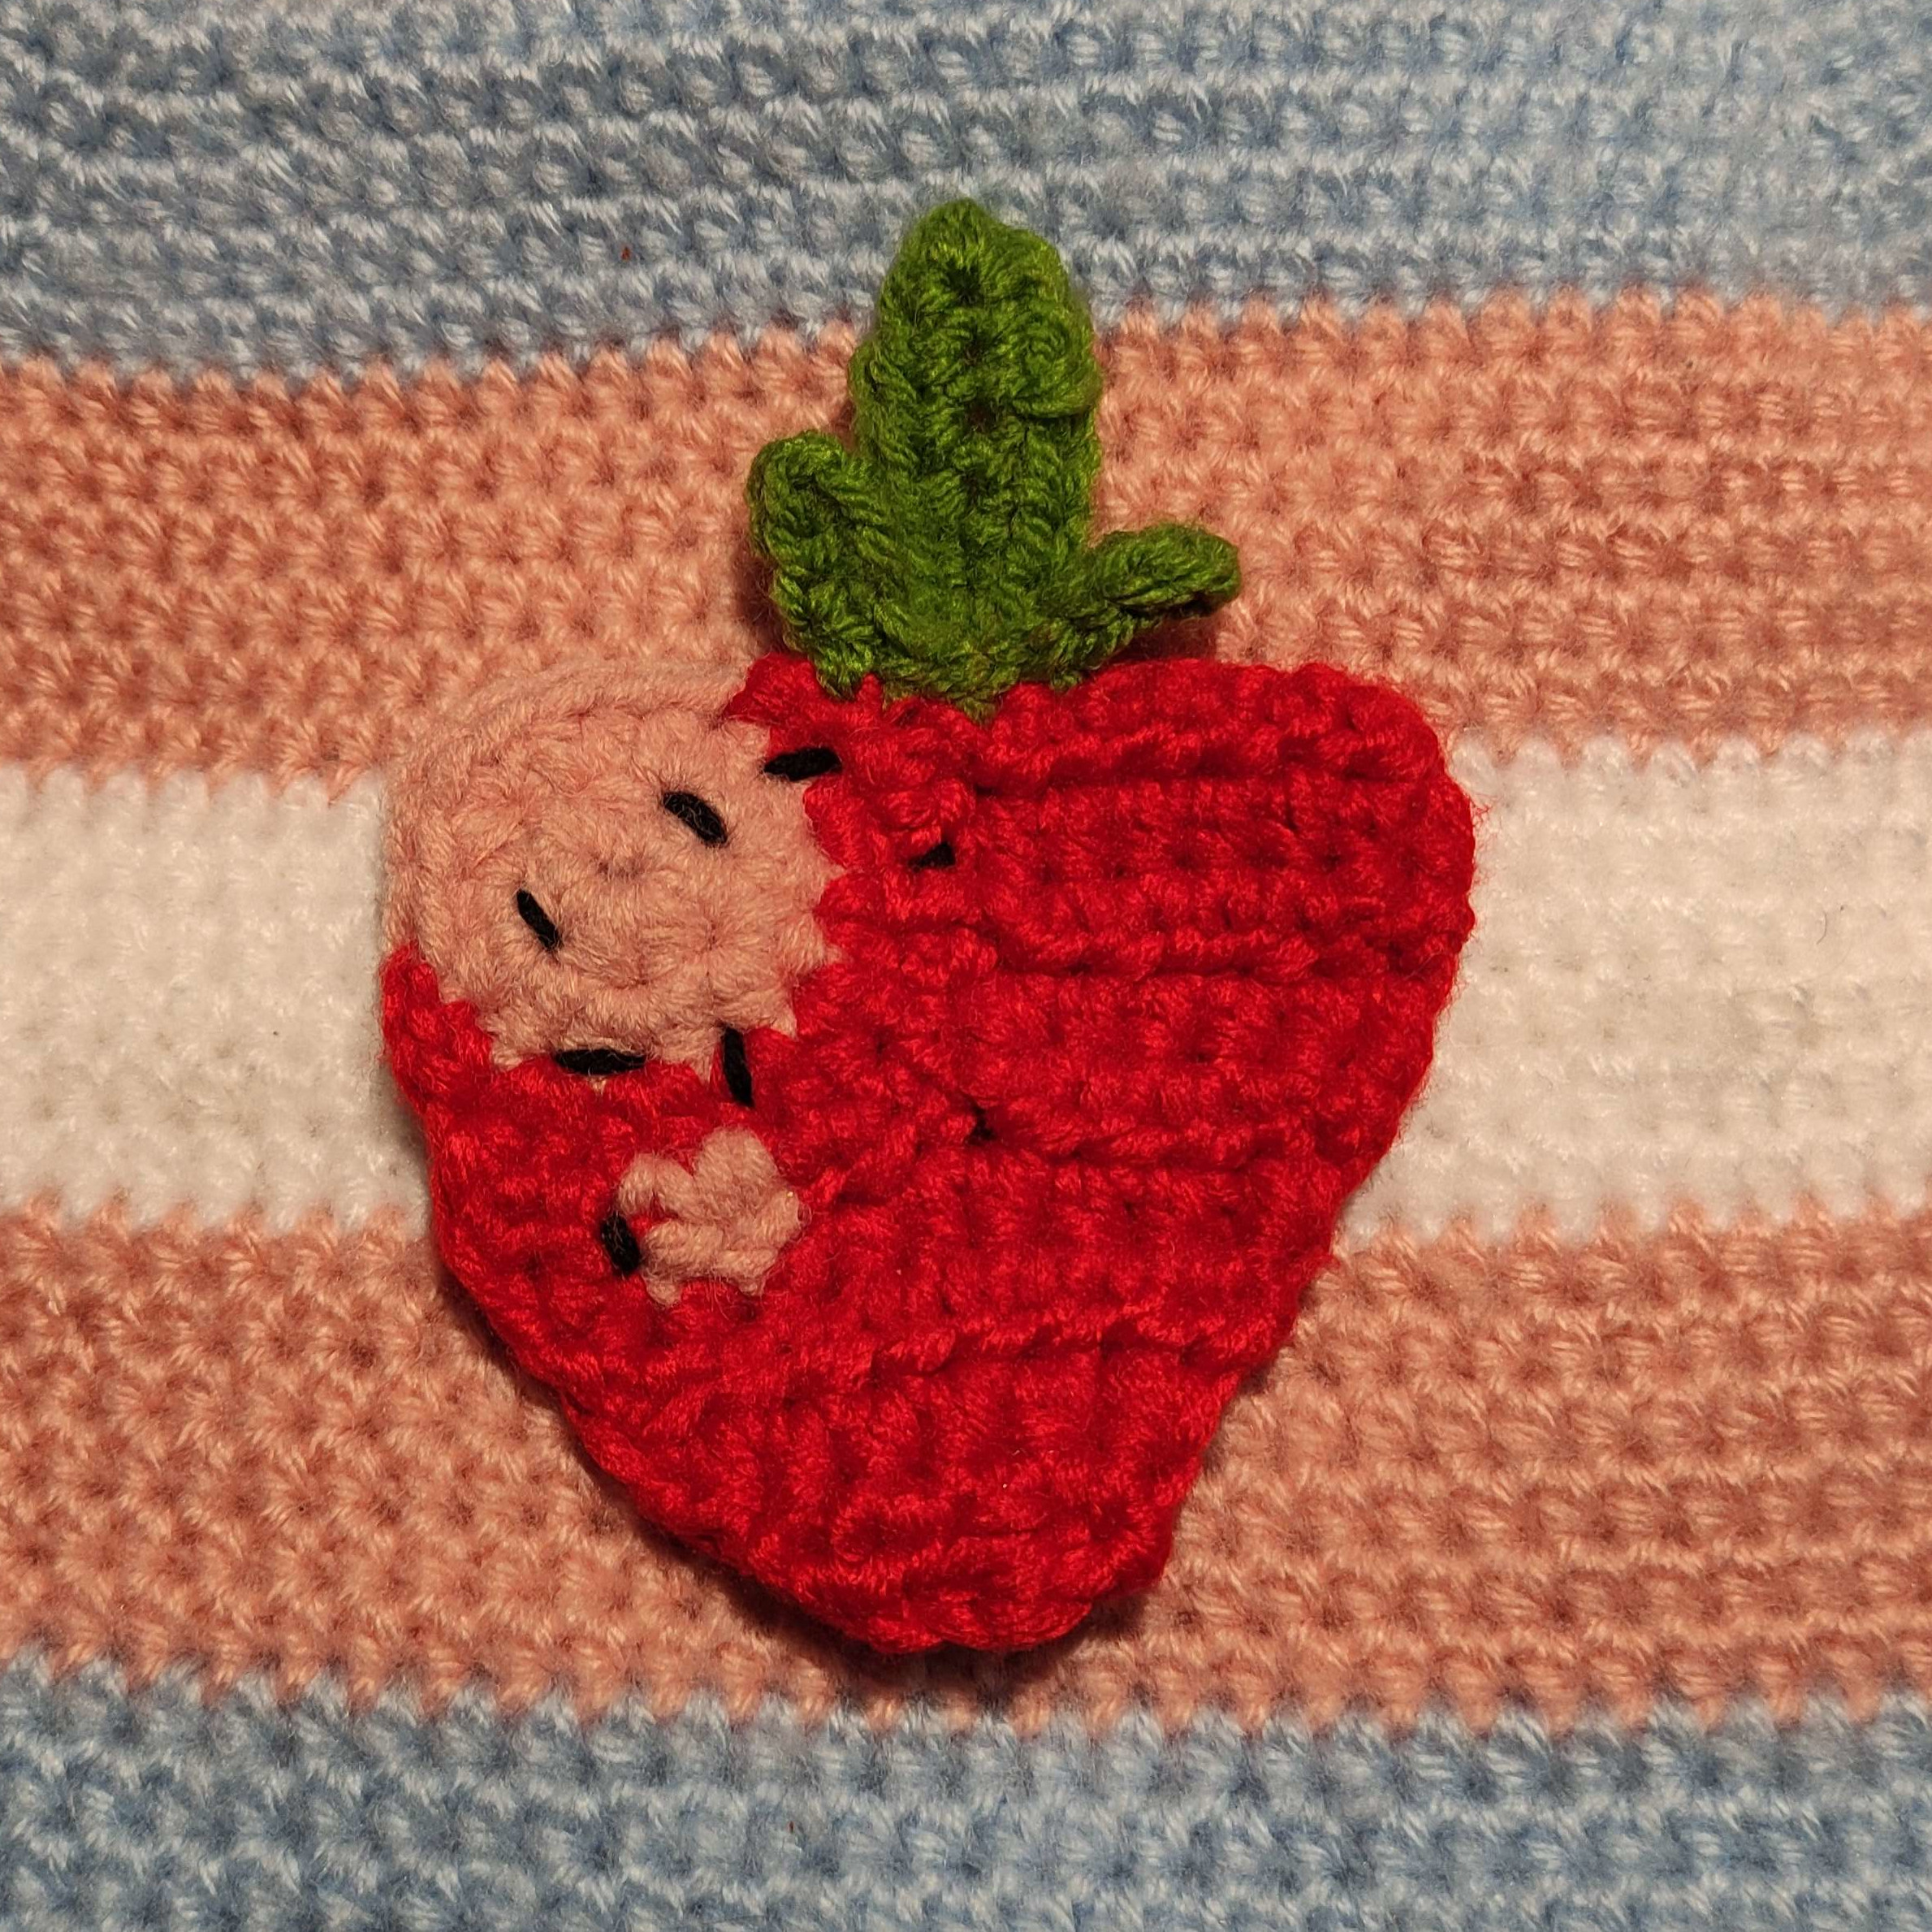 My profile picture: a strawberry on a trans flag, both made out of wool